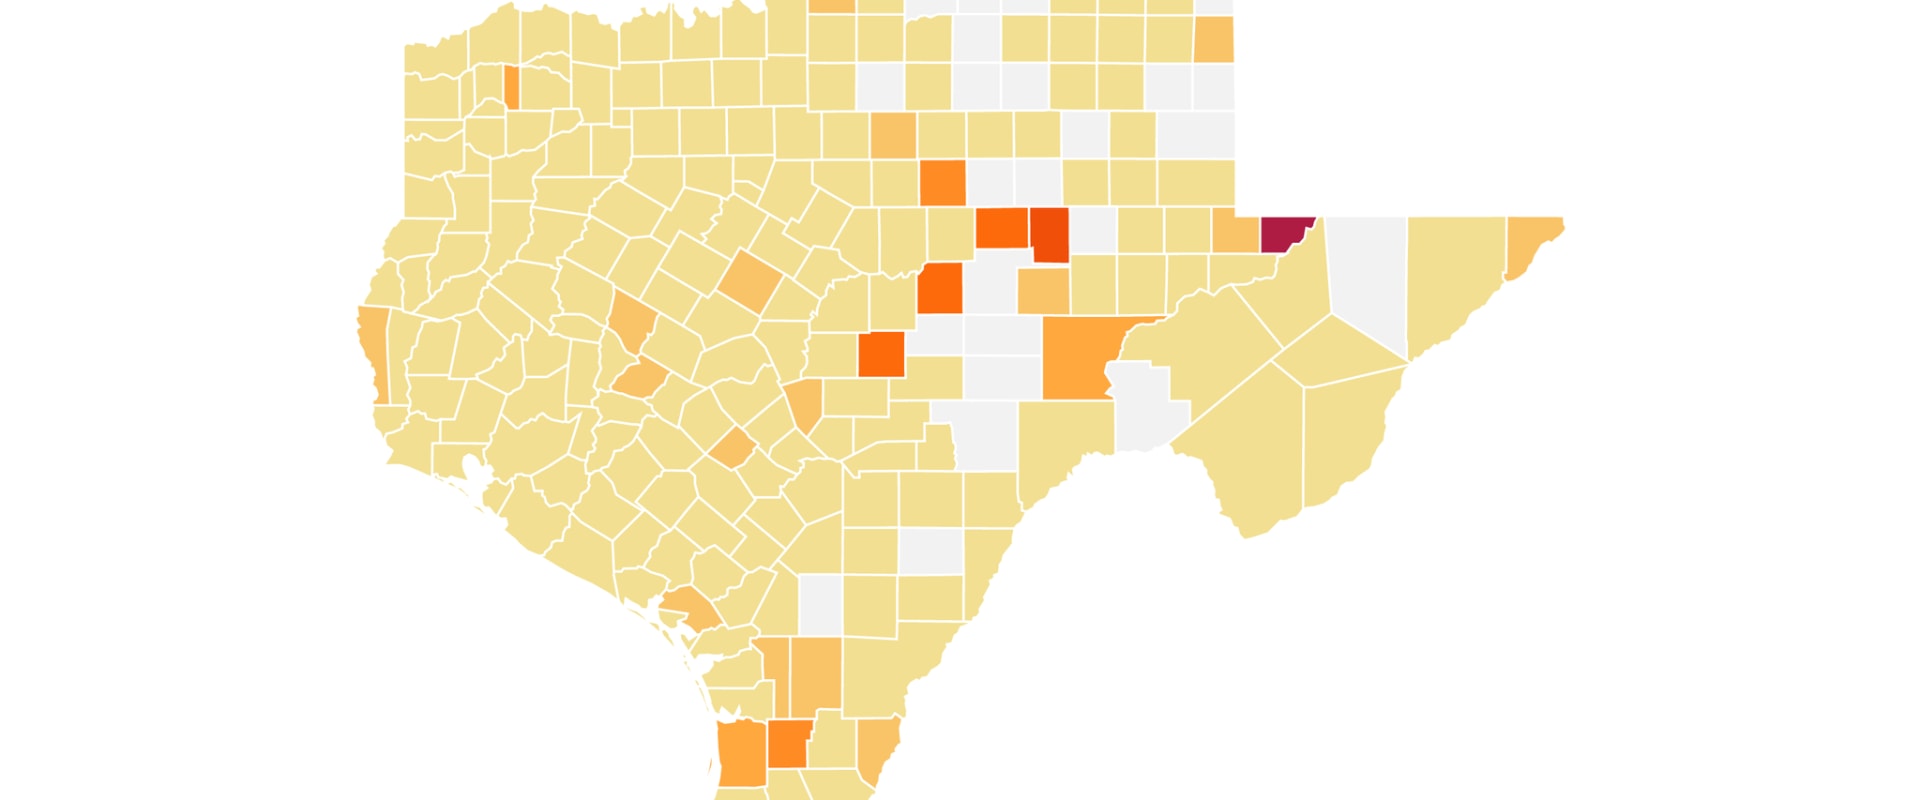 Why does texas have so many counties?